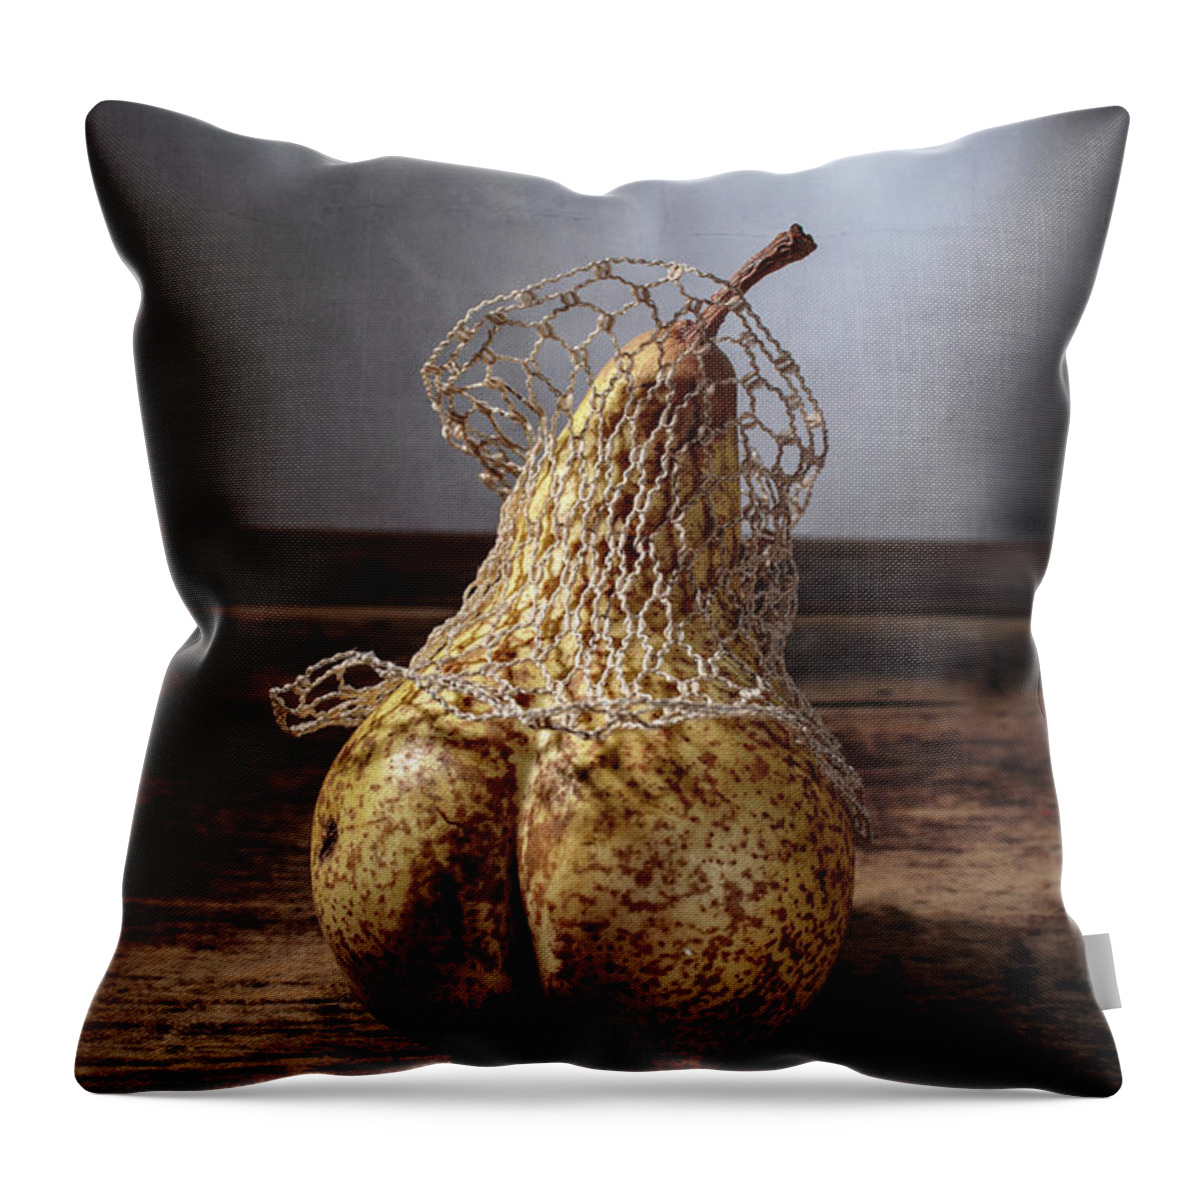 Still Life Throw Pillow featuring the photograph Pear #1 by Nailia Schwarz